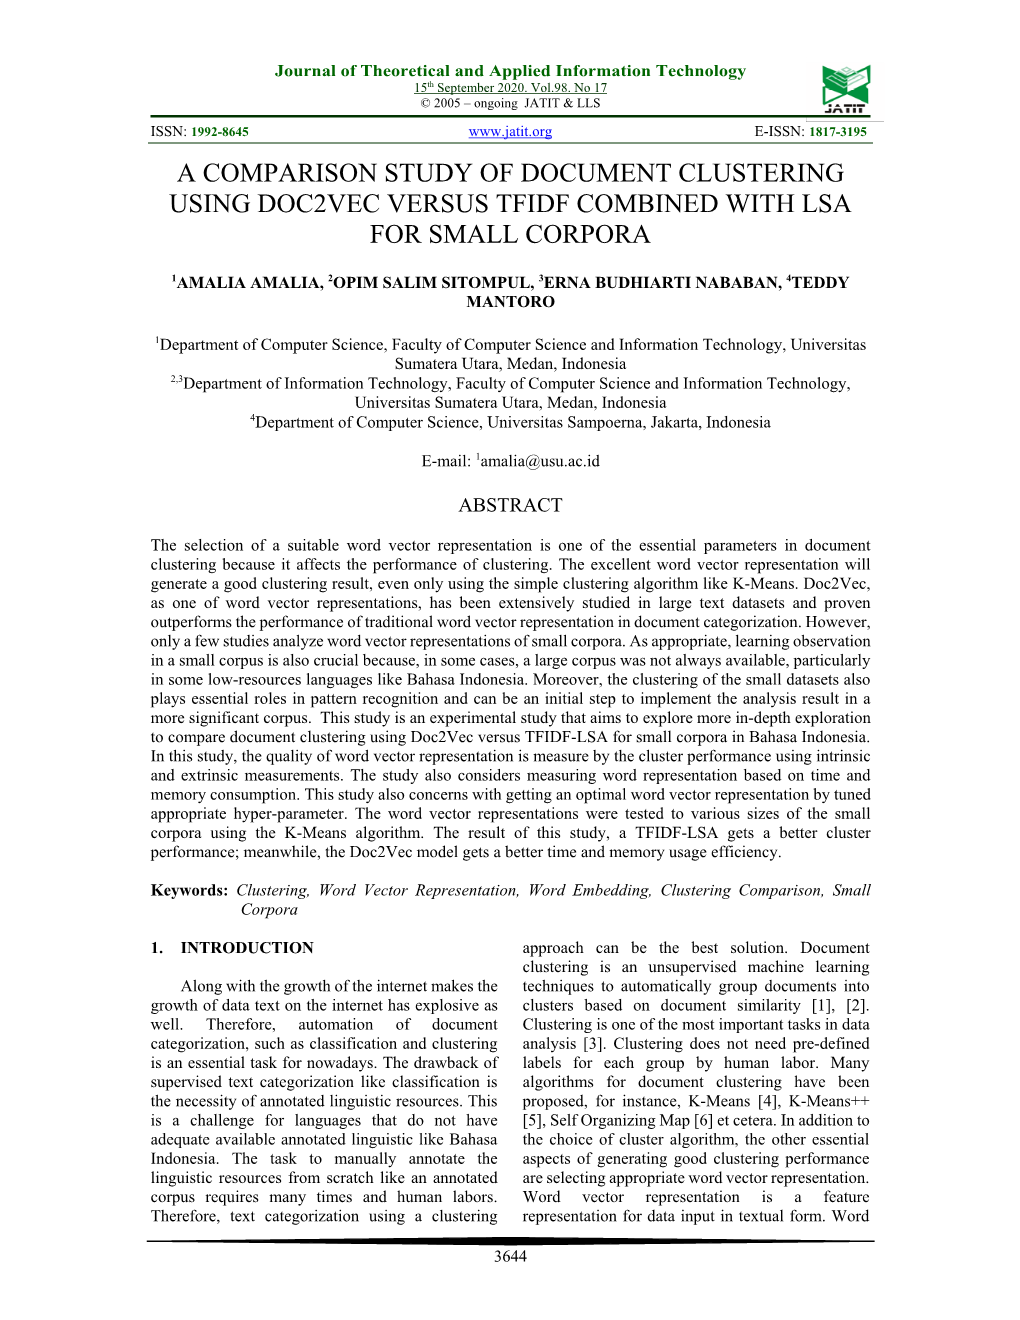 A Comparison Study of Document Clustering Using Doc2vec Versus Tfidf Combined with Lsa for Small Corpora